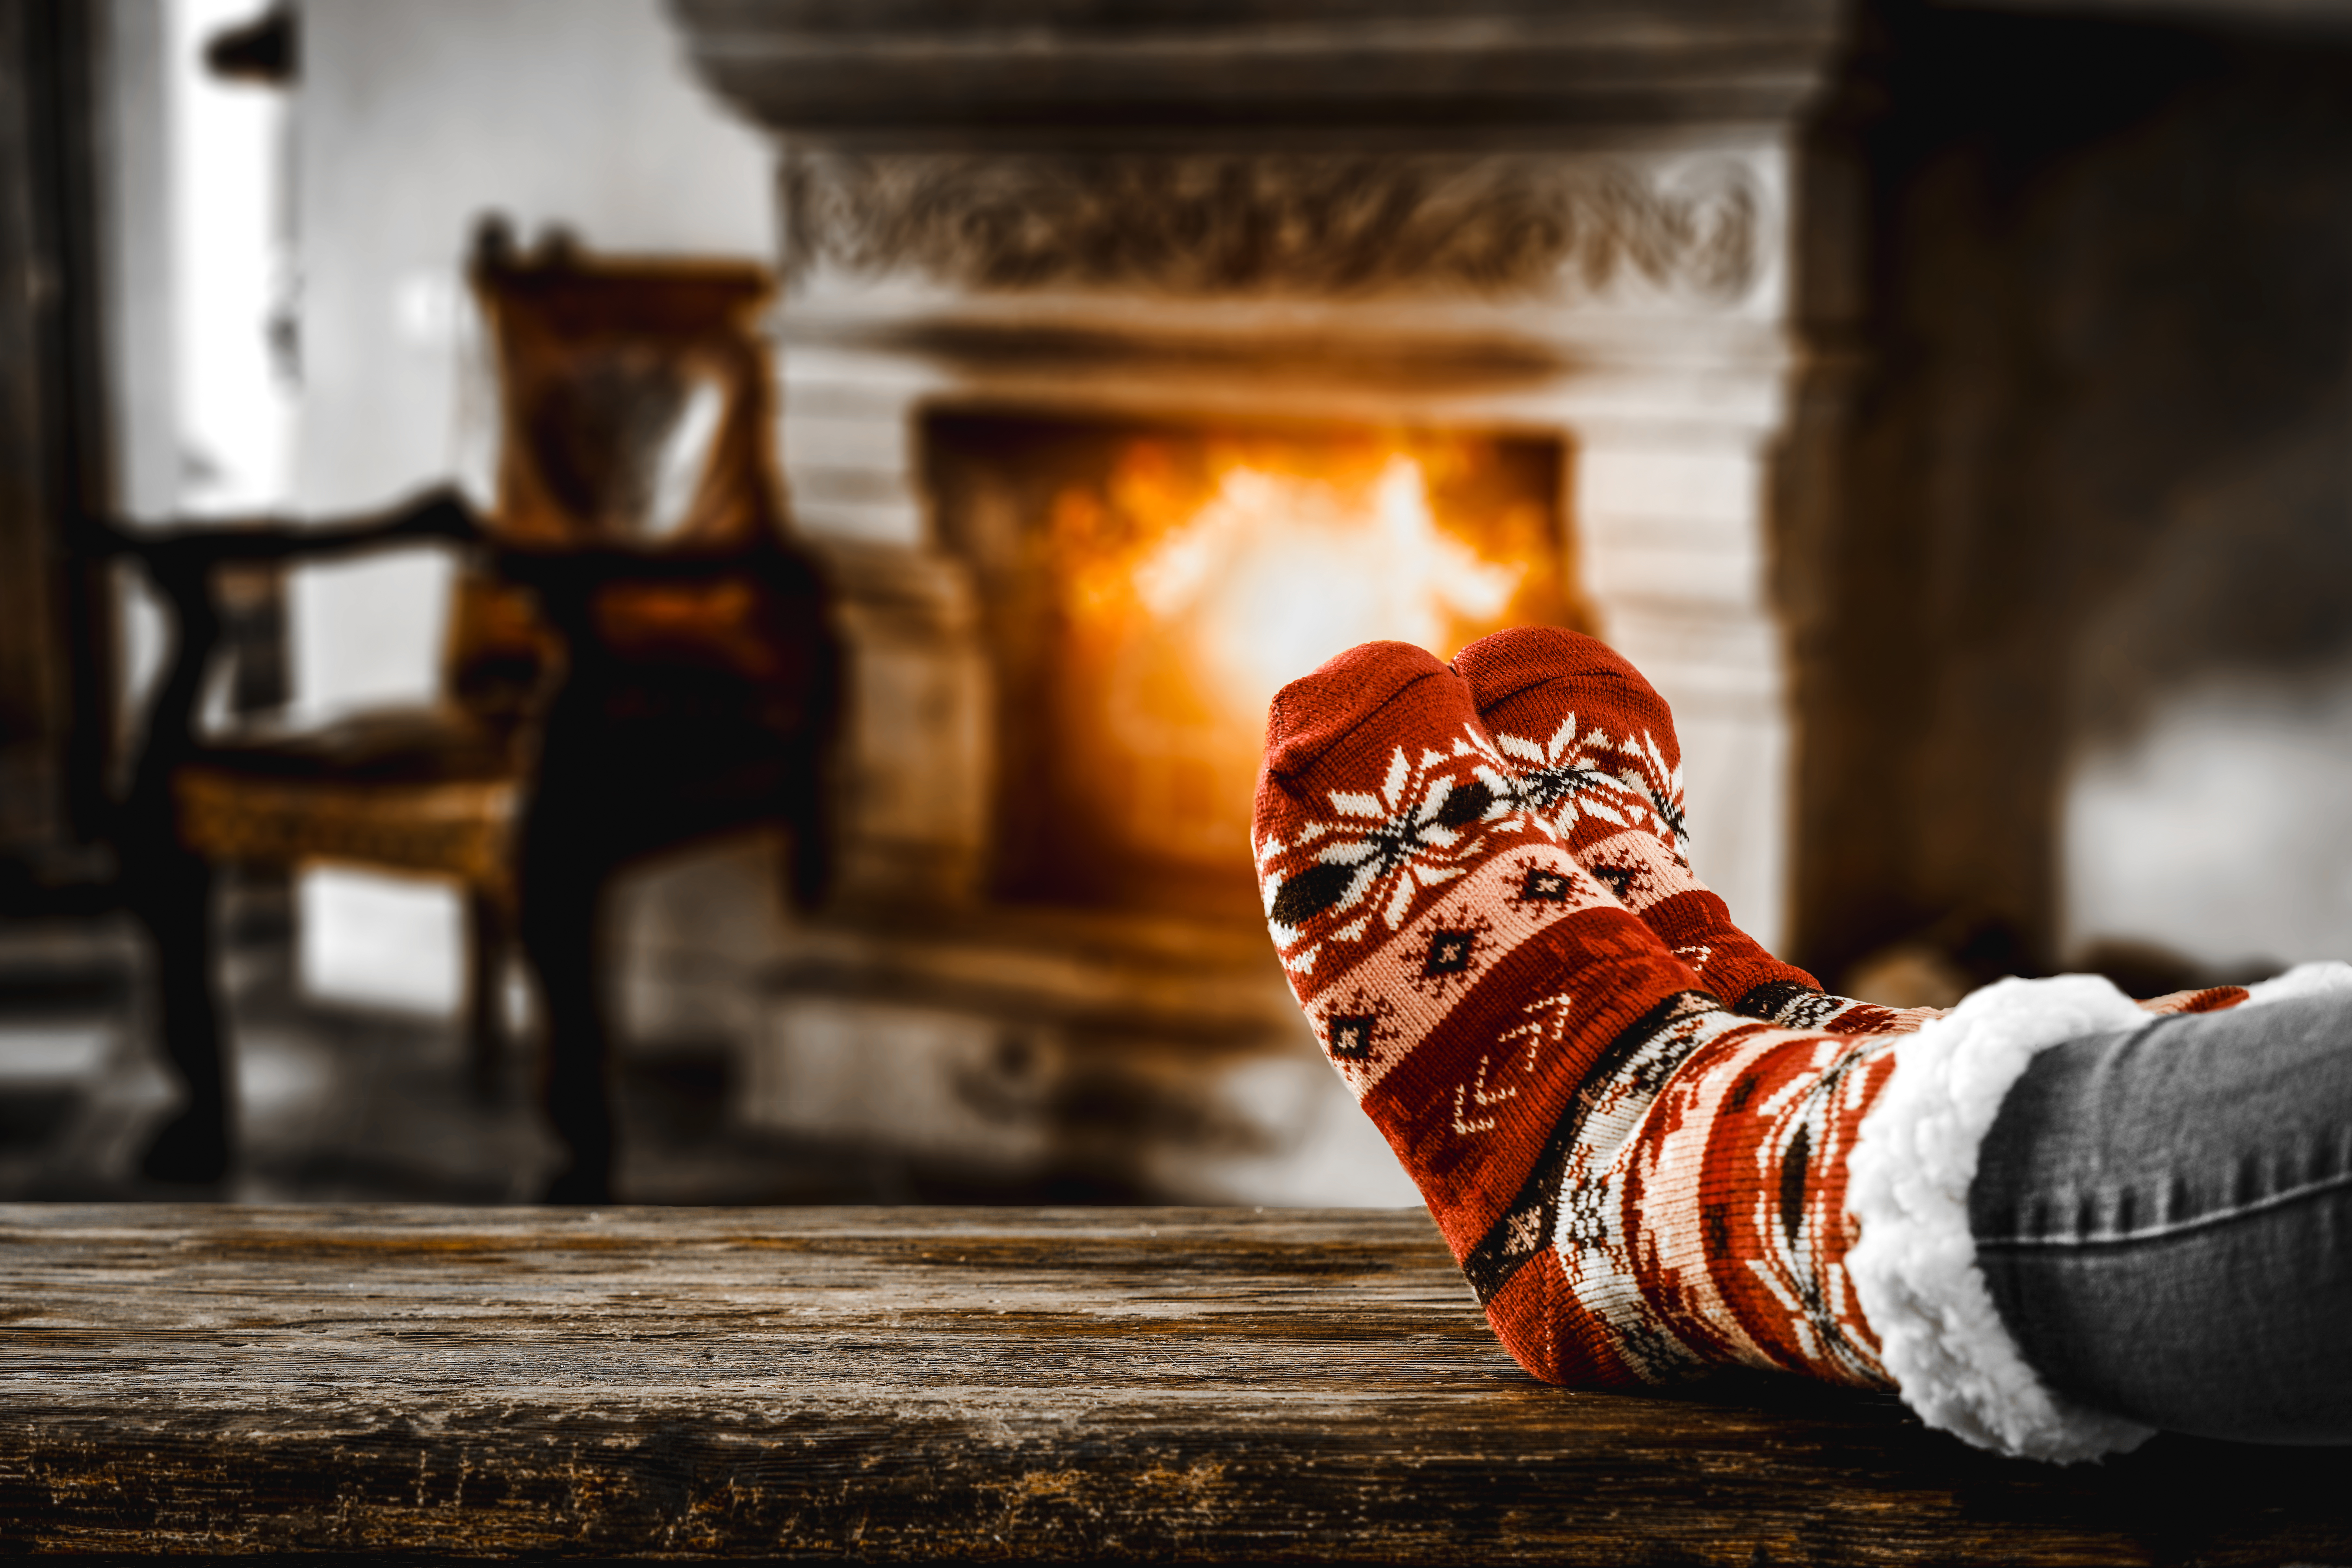 Tips for Keeping Your Diabetic Feet Healthy During the Holidays